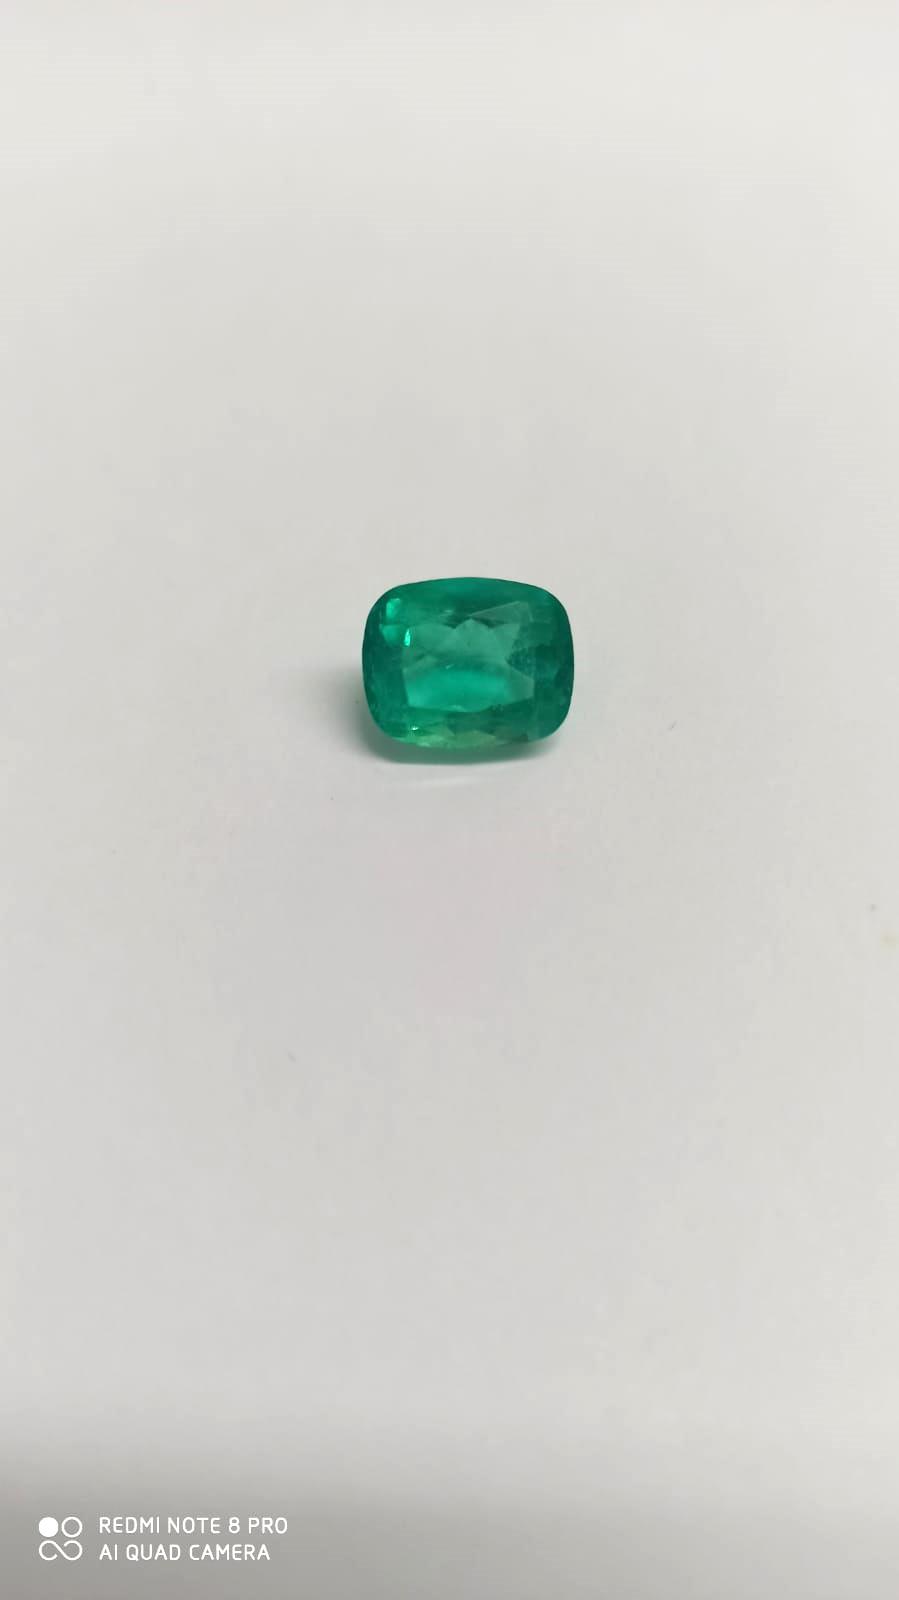 4.30 Ct. Colombian Emerald